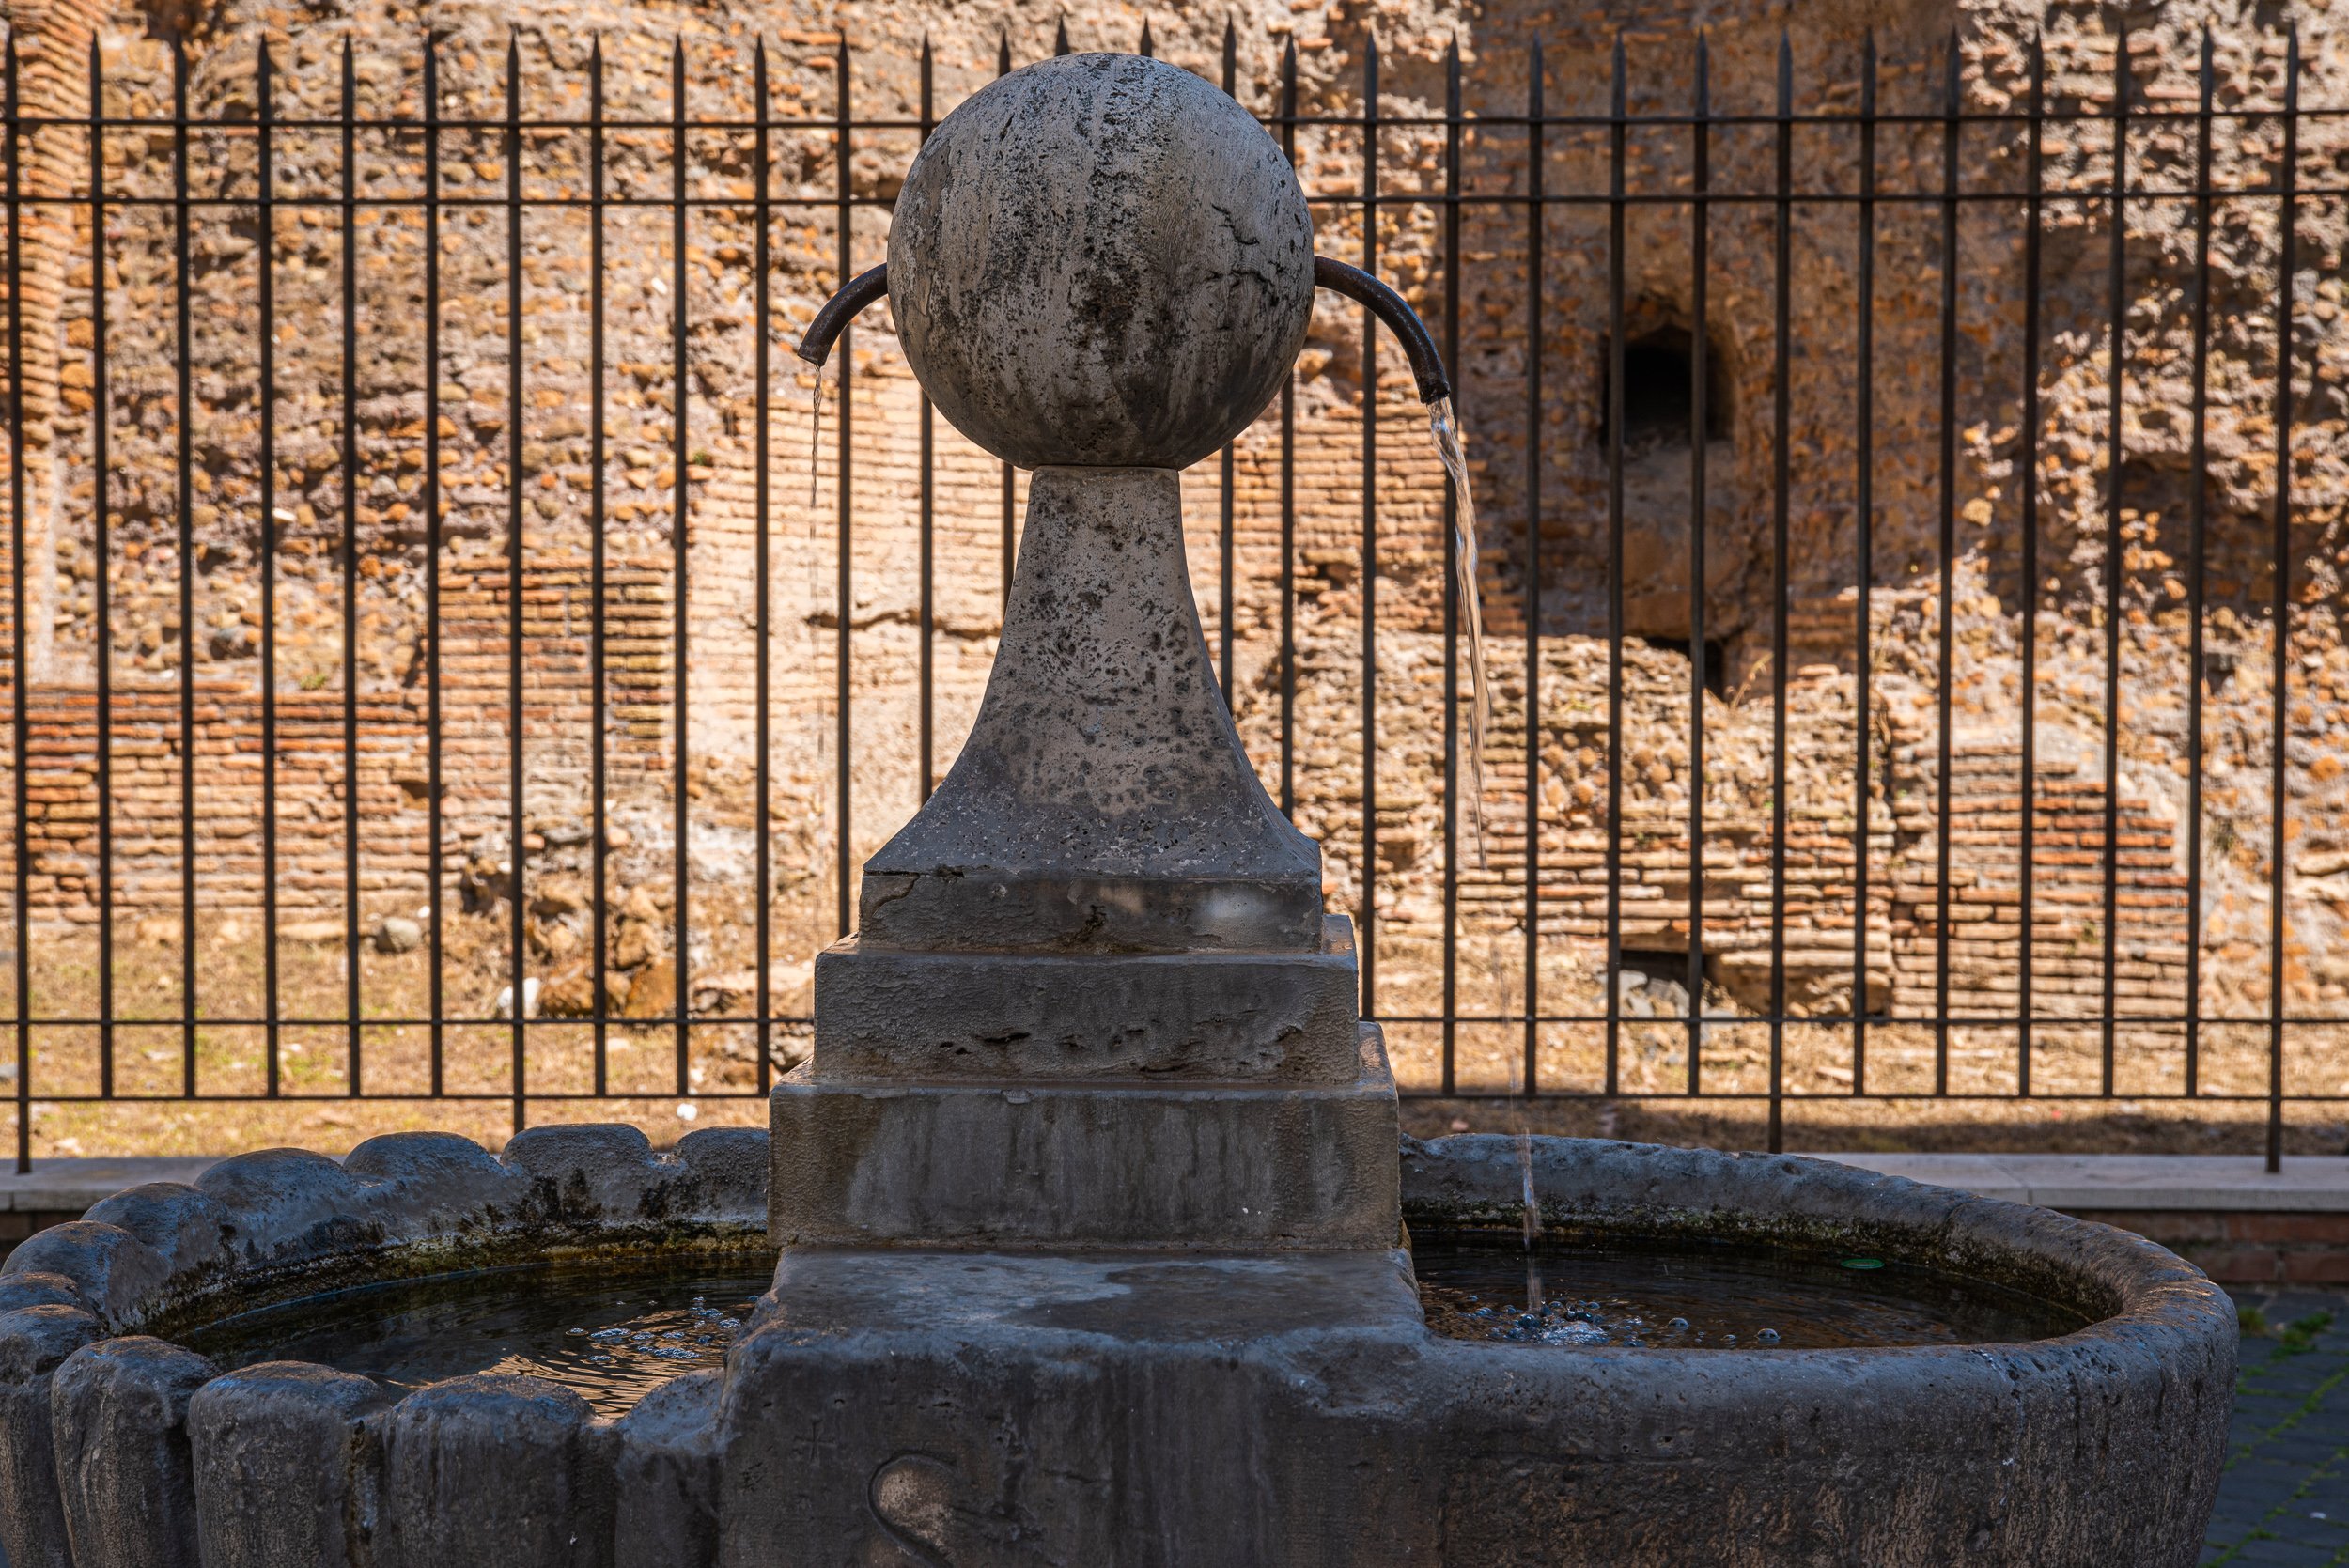 Drinking Fountains In Rome Are Safe